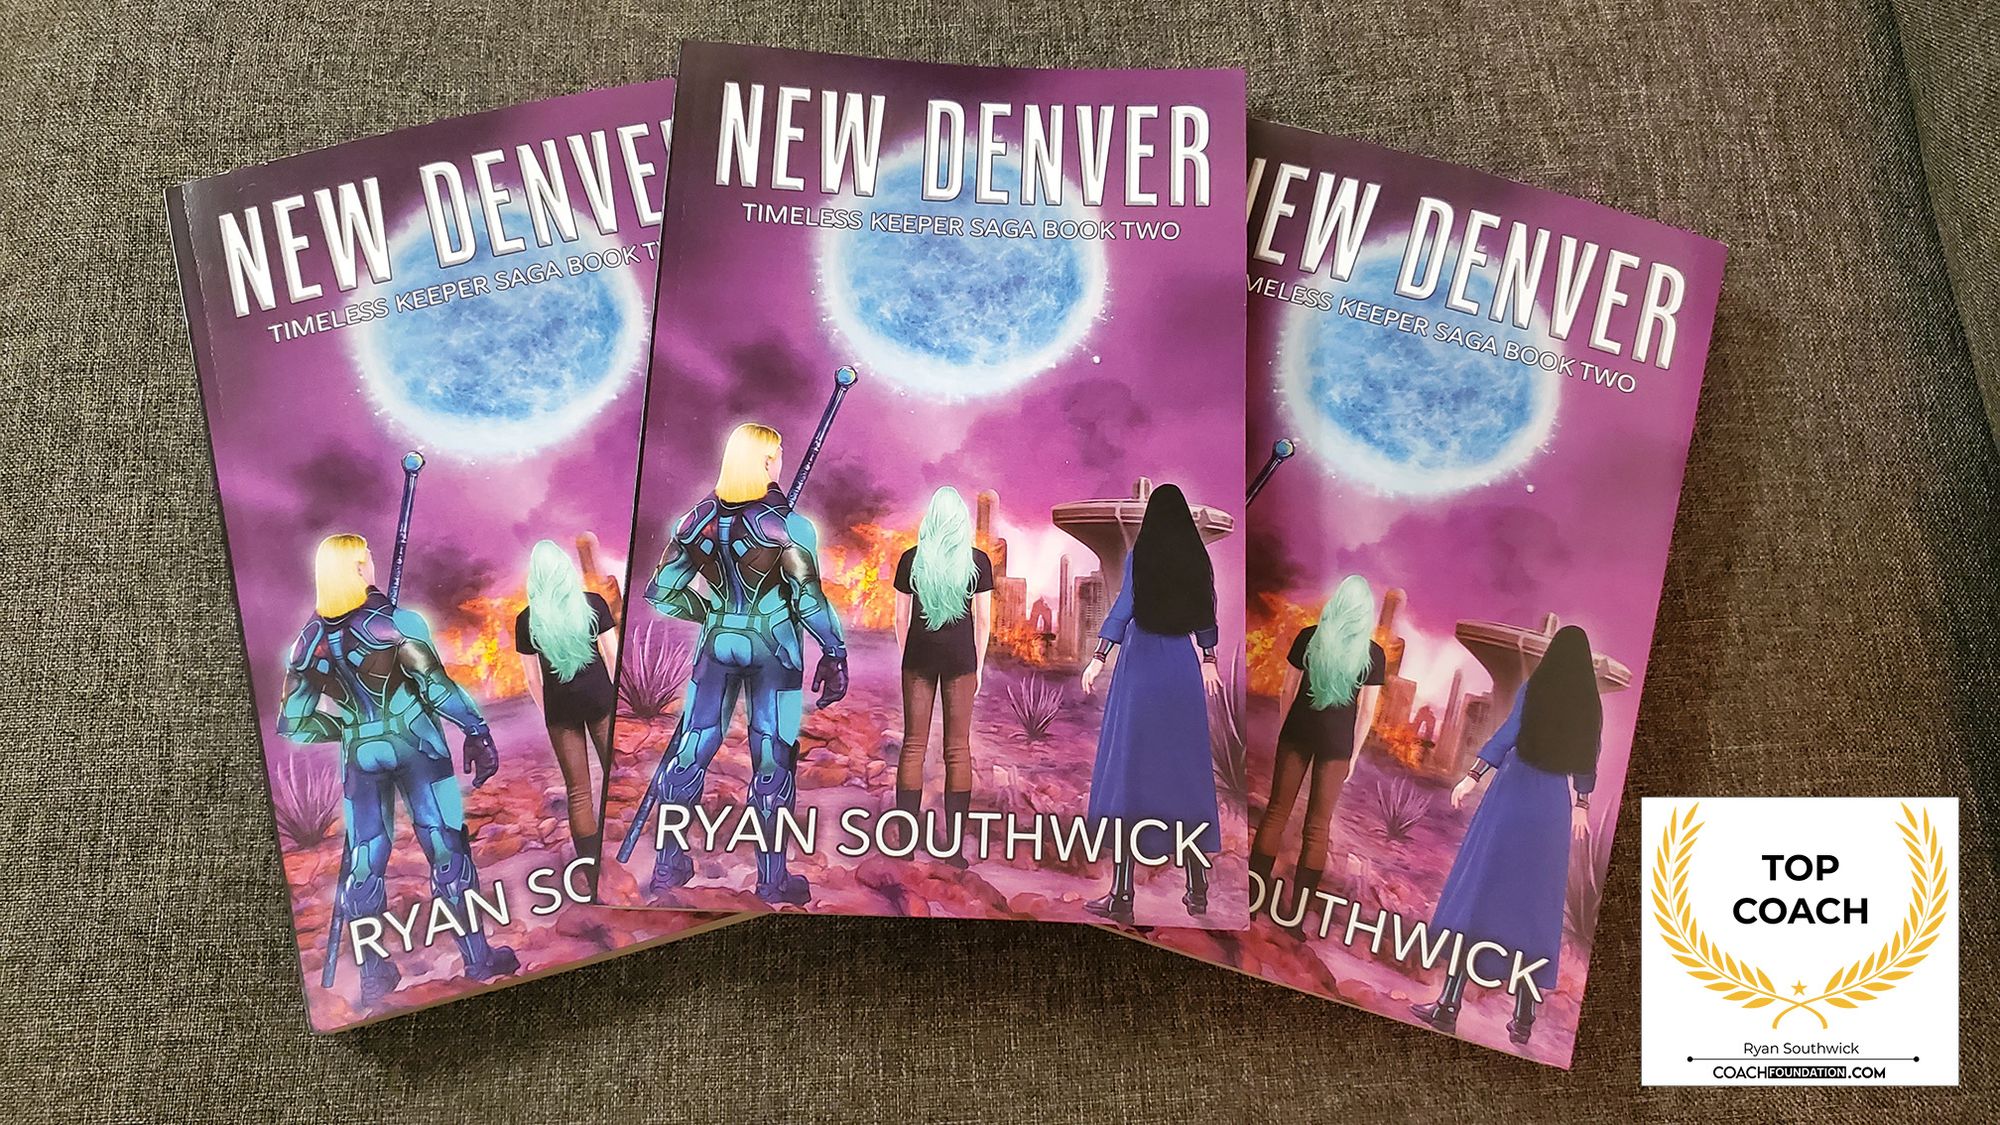 3 paperback copies of New Denver on a material background. "Top Coach" award symbol.